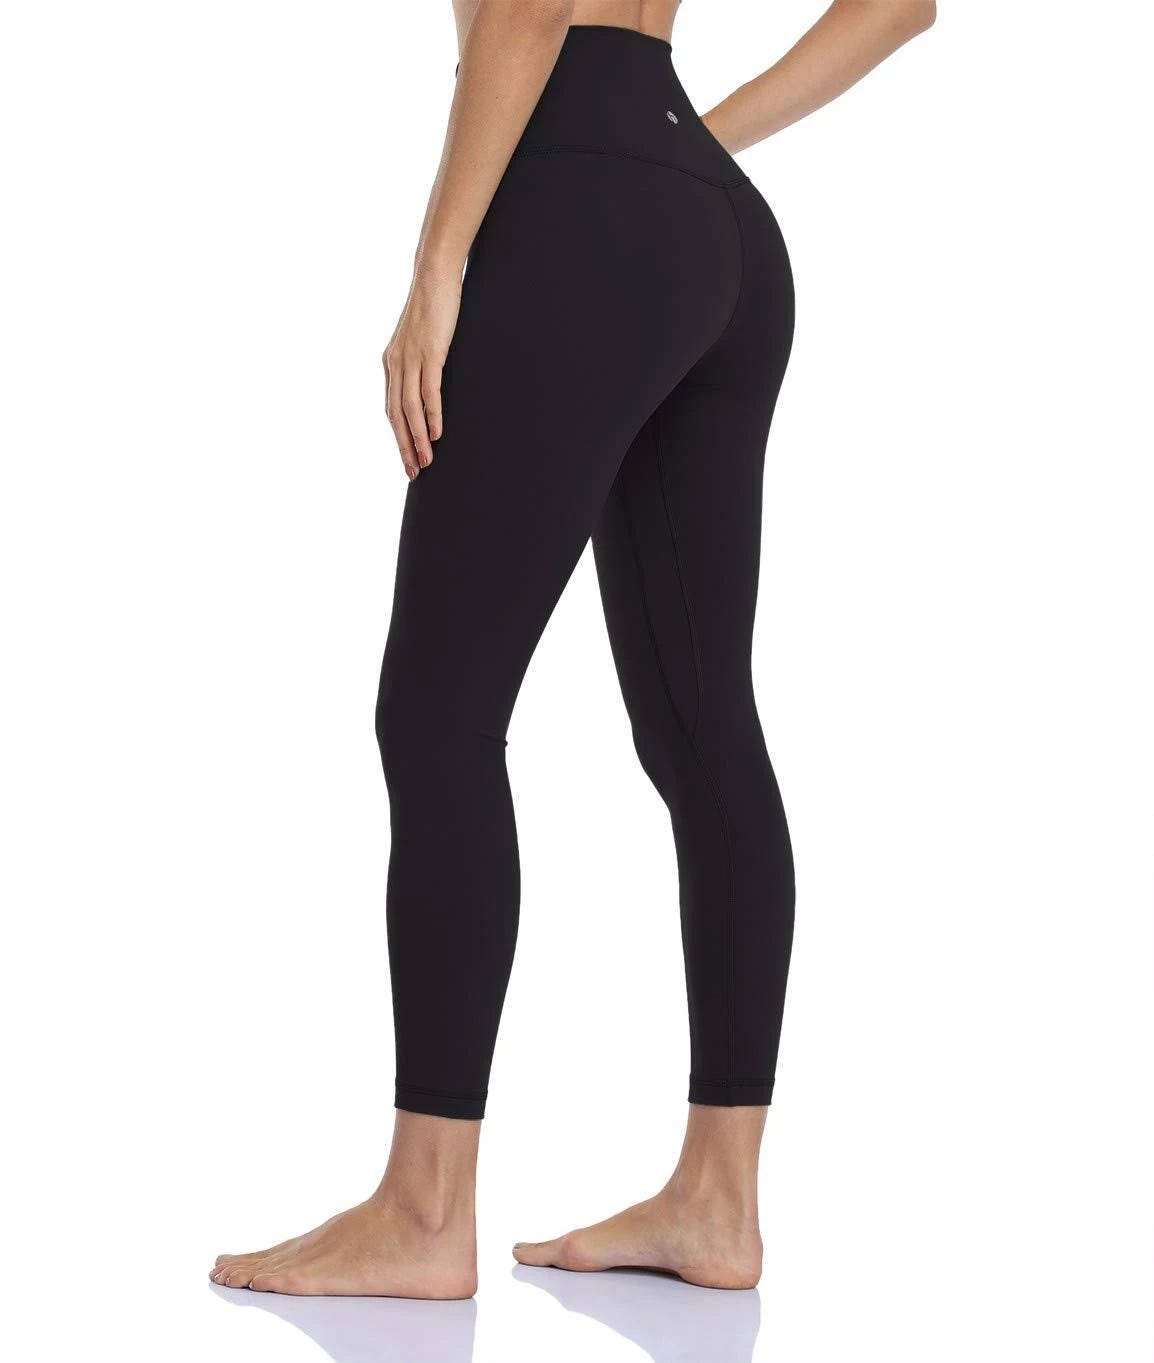 High Waisted Compression Leggings for Women: Essential II Collection | Image